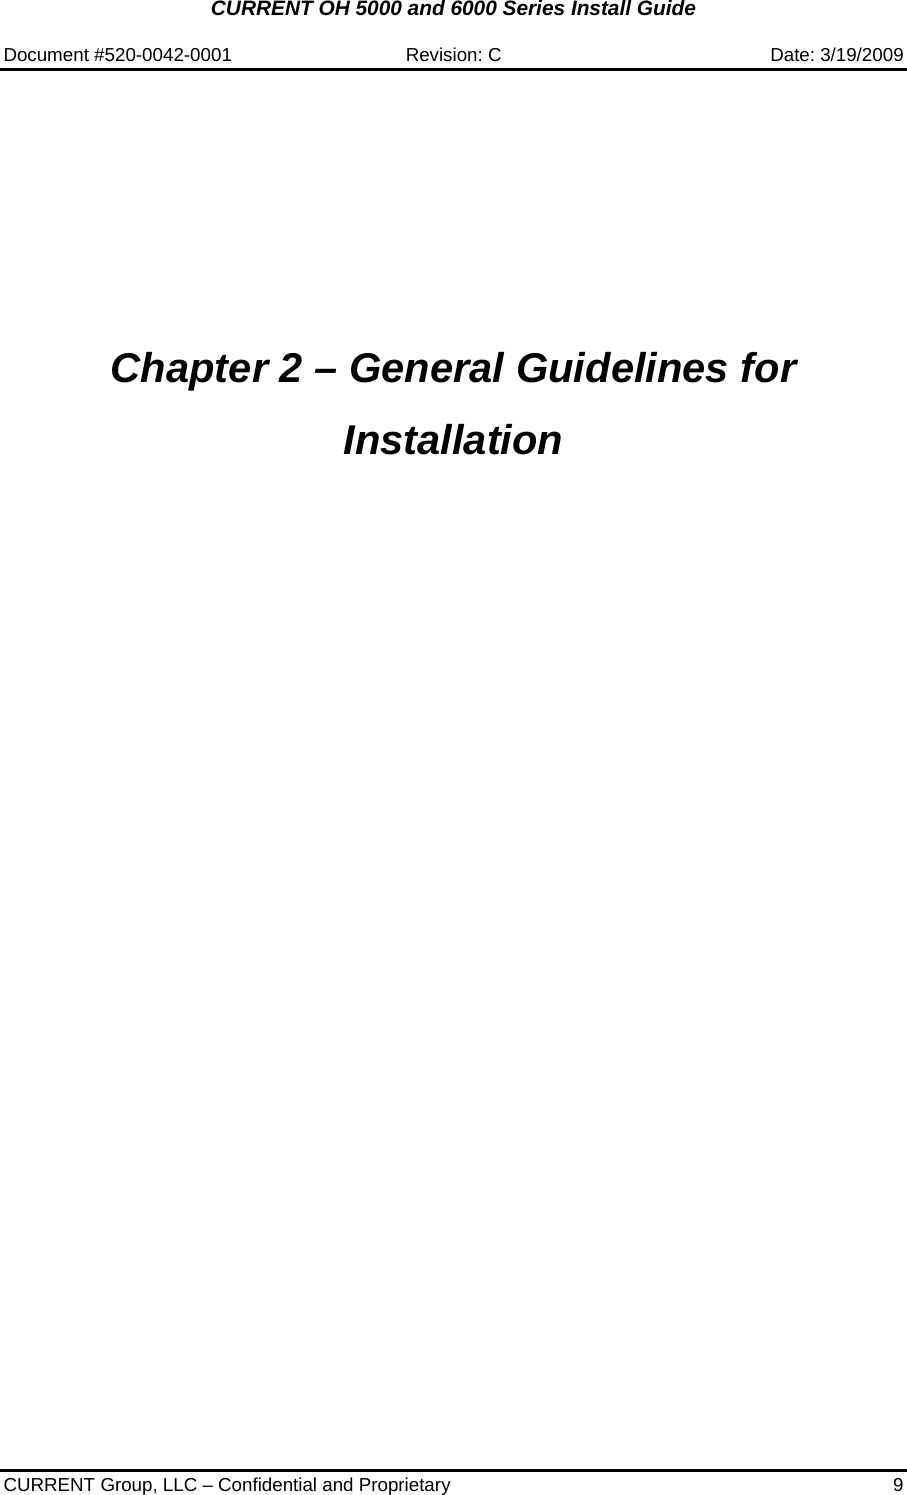 CURRENT OH 5000 and 6000 Series Install Guide  Document #520-0042-0001  Revision: C  Date: 3/19/2009  CURRENT Group, LLC – Confidential and Proprietary  9           Chapter 2 – General Guidelines for Installation  